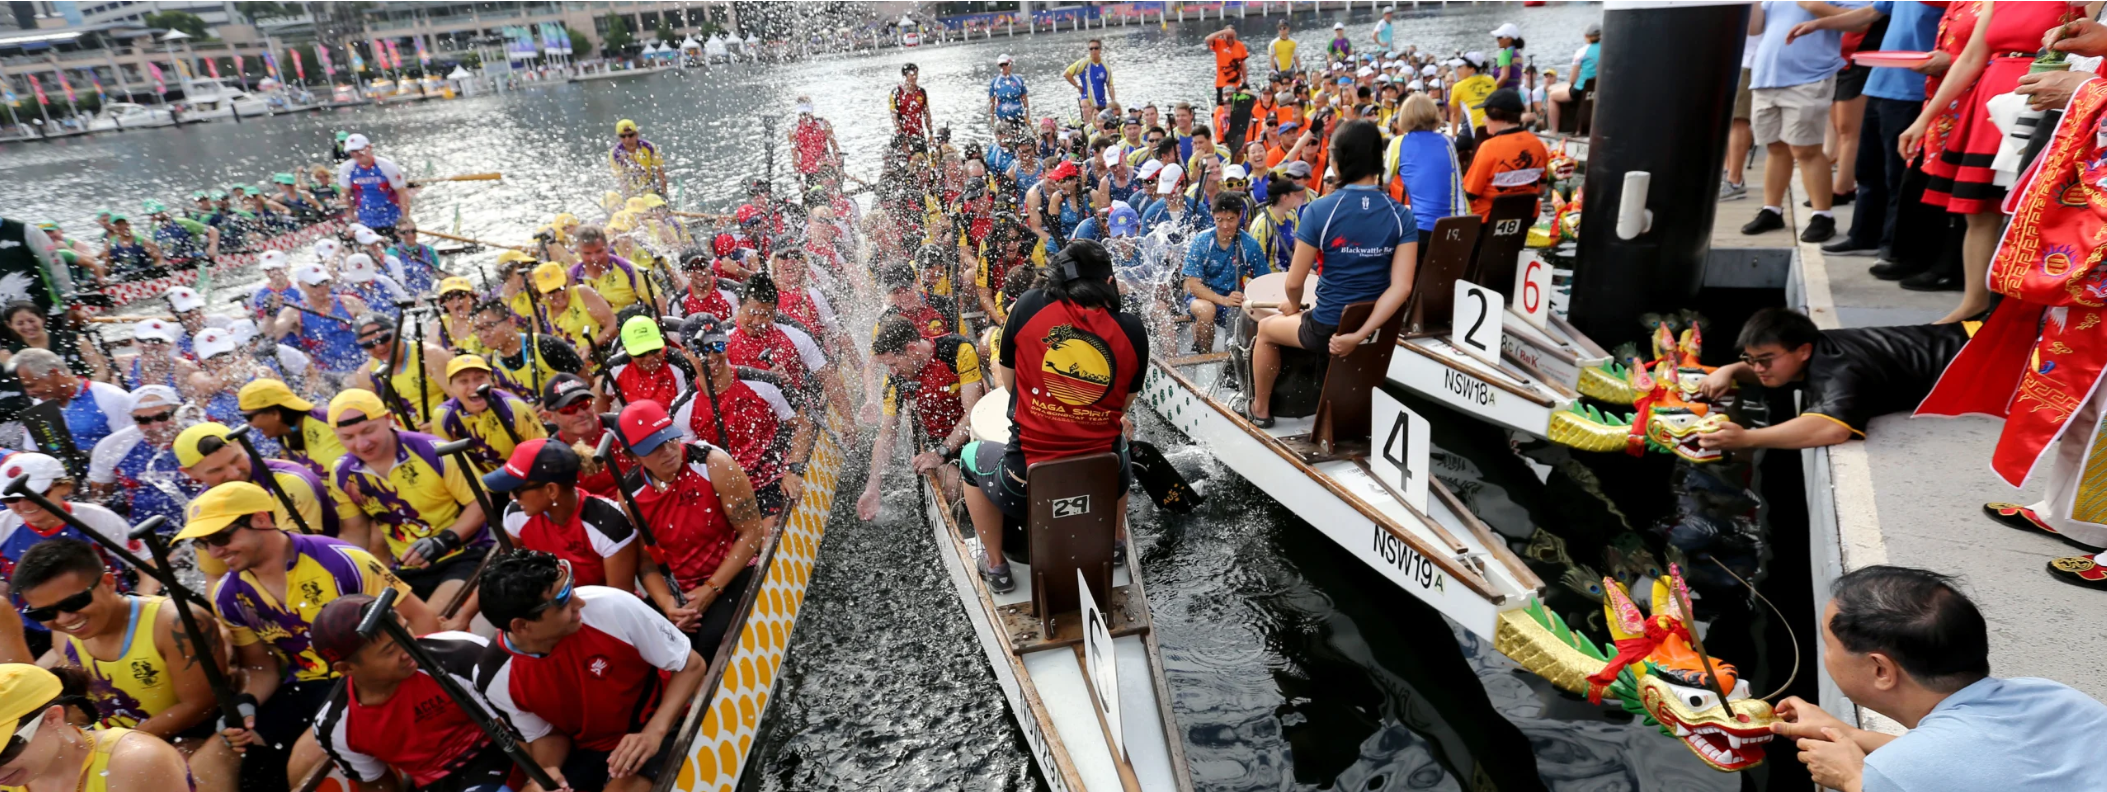 The annual dragon boat race on Darling Harbour in Sydney is one of the largest in the southern hemisphere.